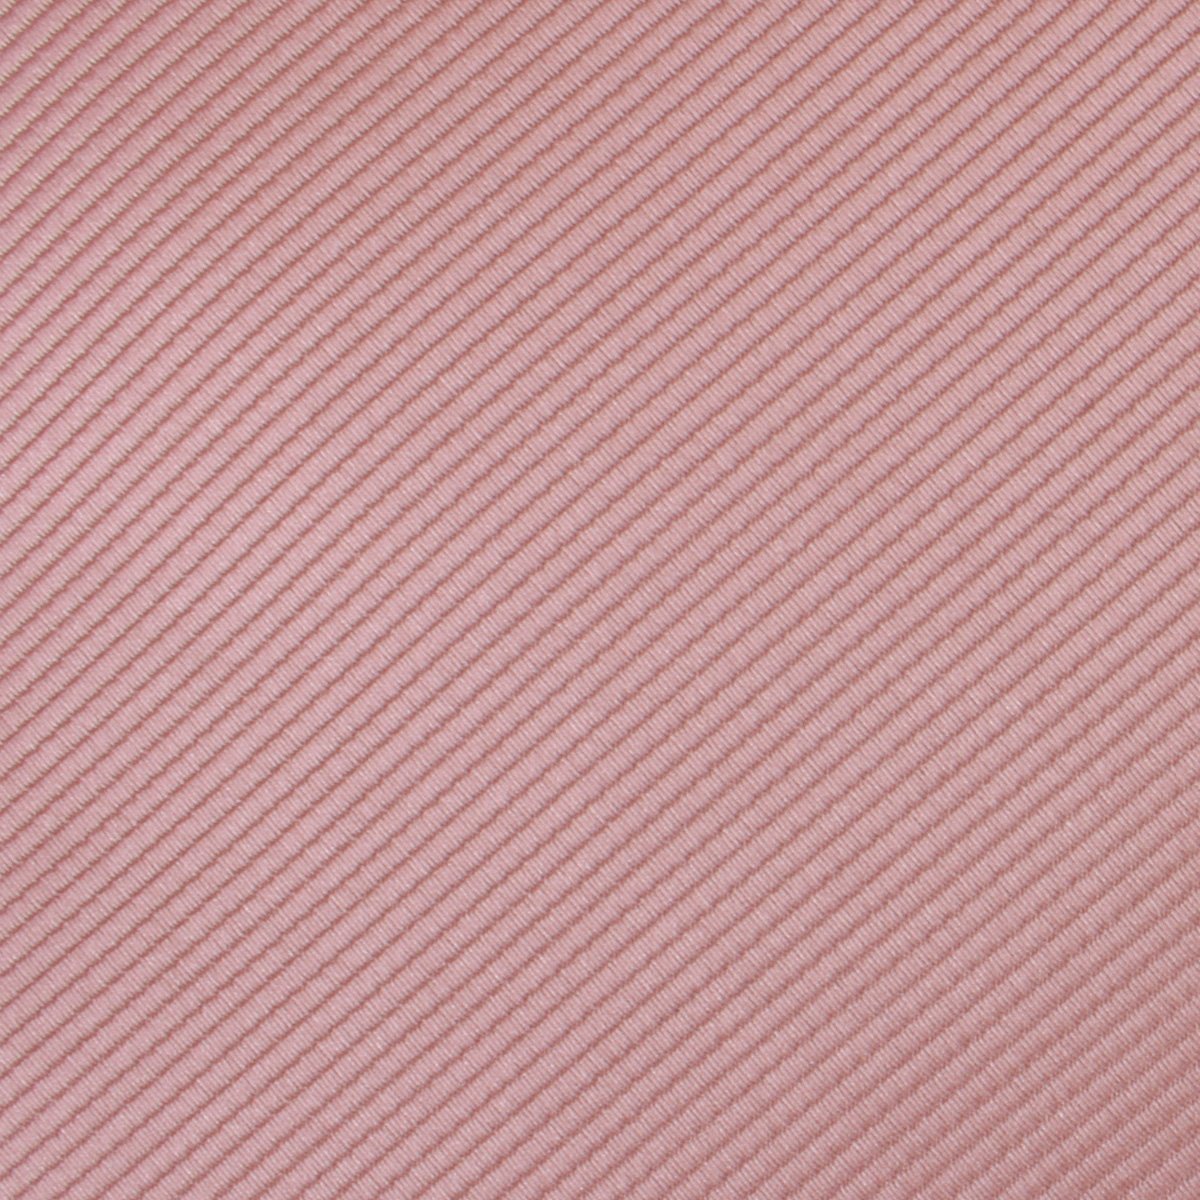 Dusty Rose Vintage Twill Pocket Square Fabric